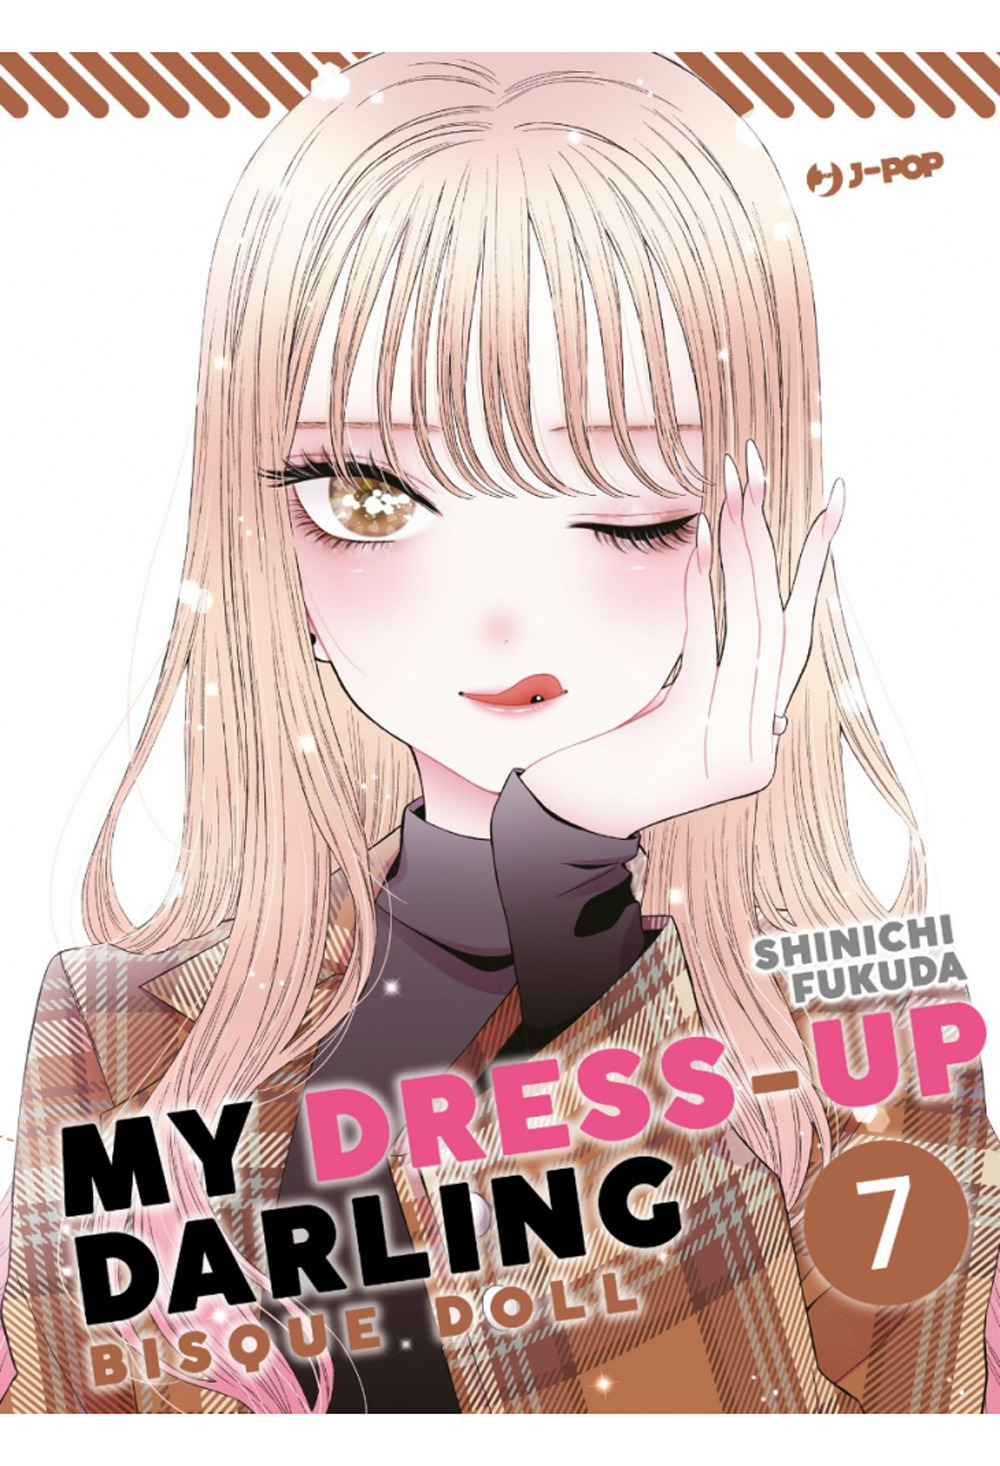 My dress up darling. Bisque doll. Vol. 7